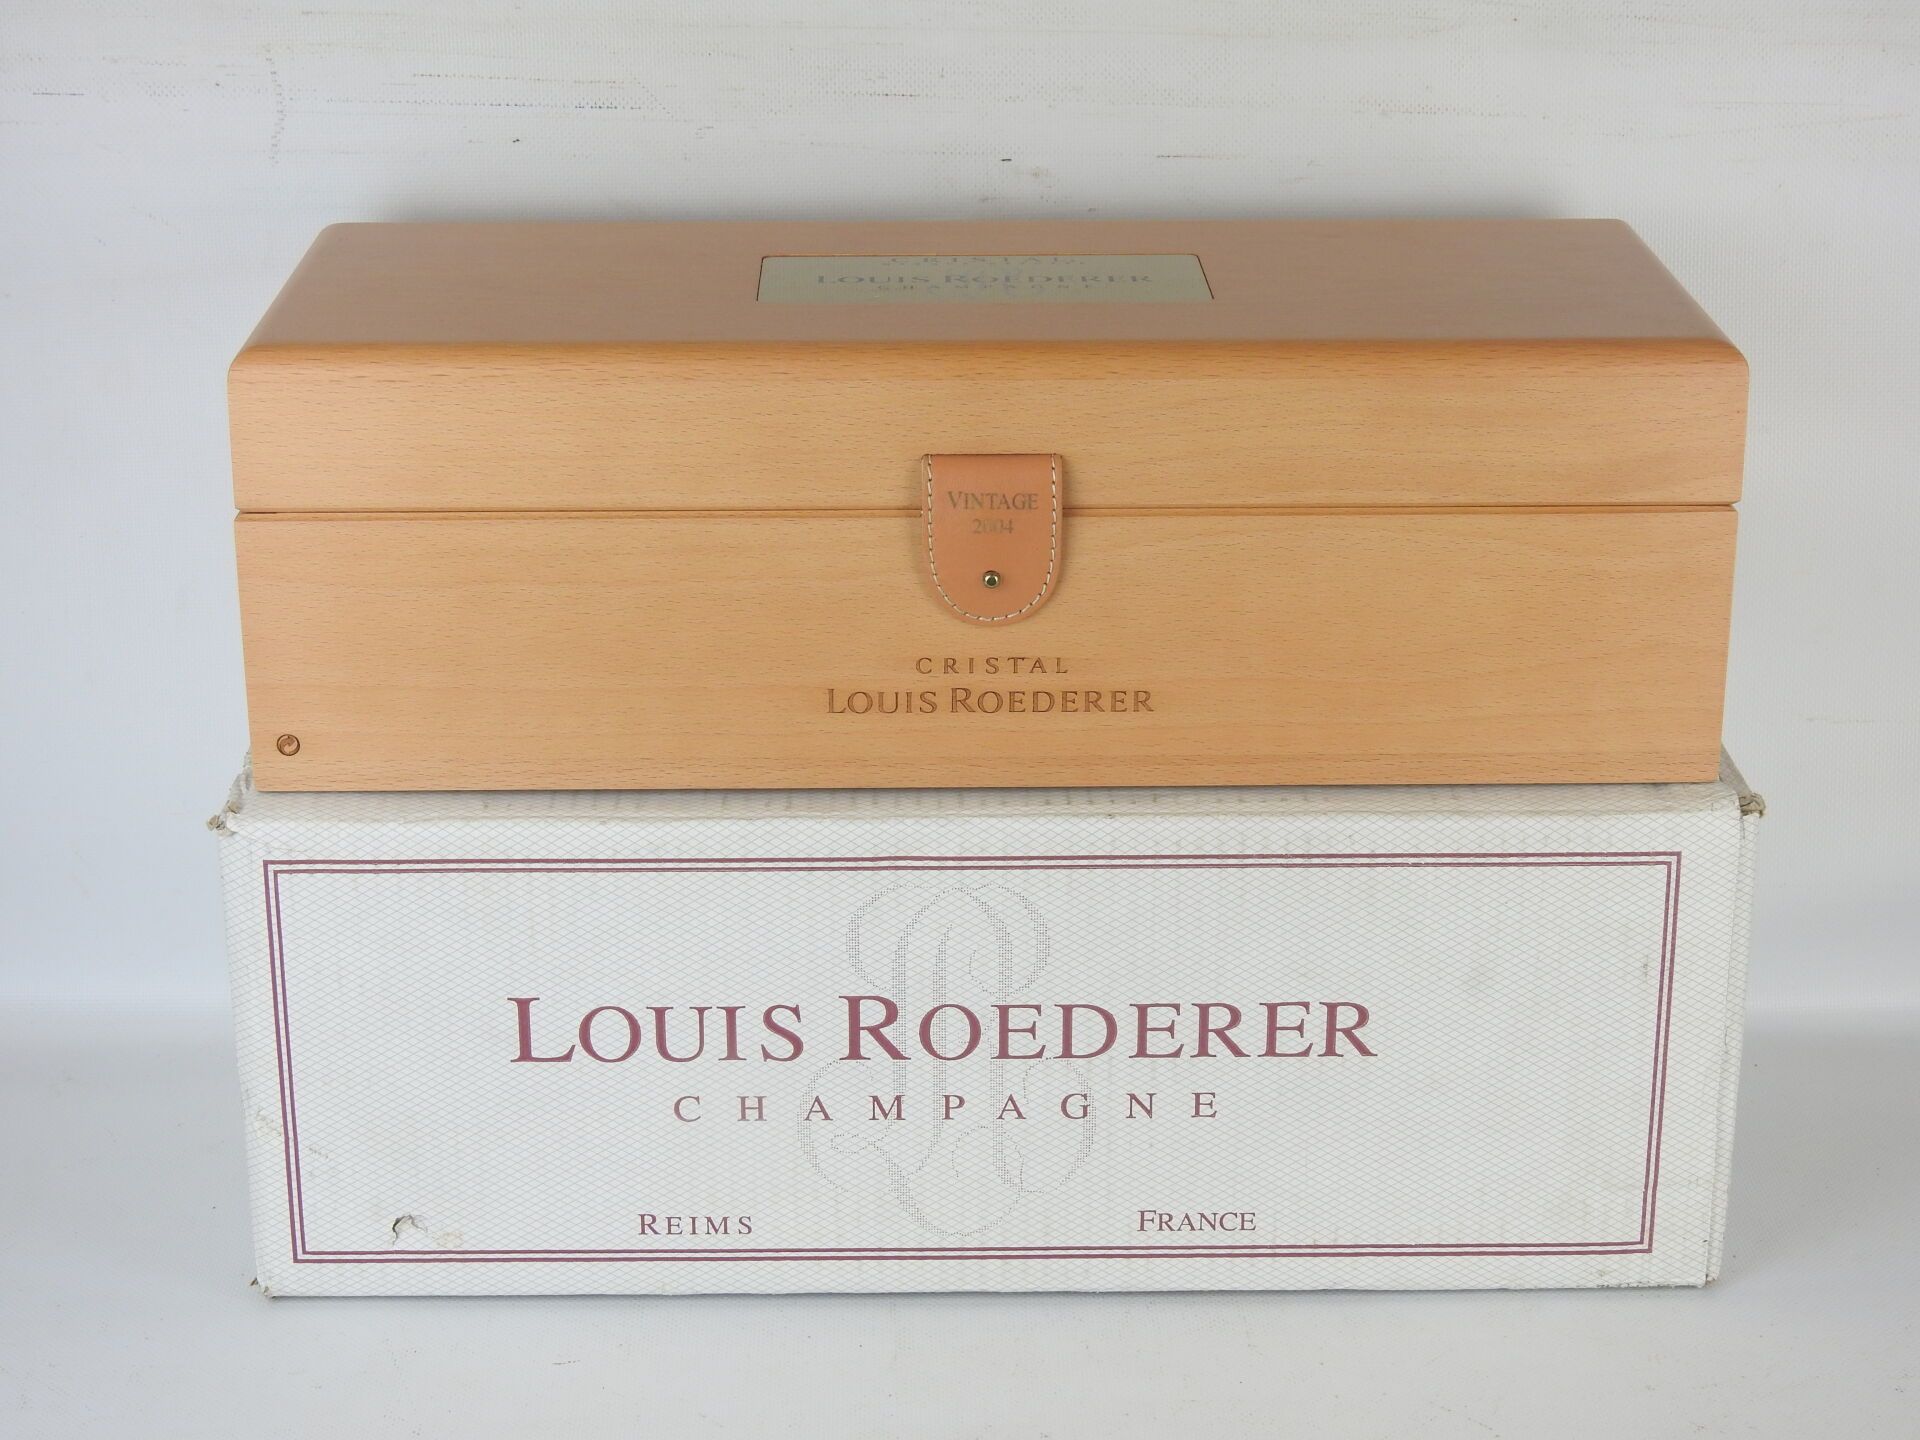 Null 1 magnum Cristal Roederer 2004 champagne. In box with original carton.